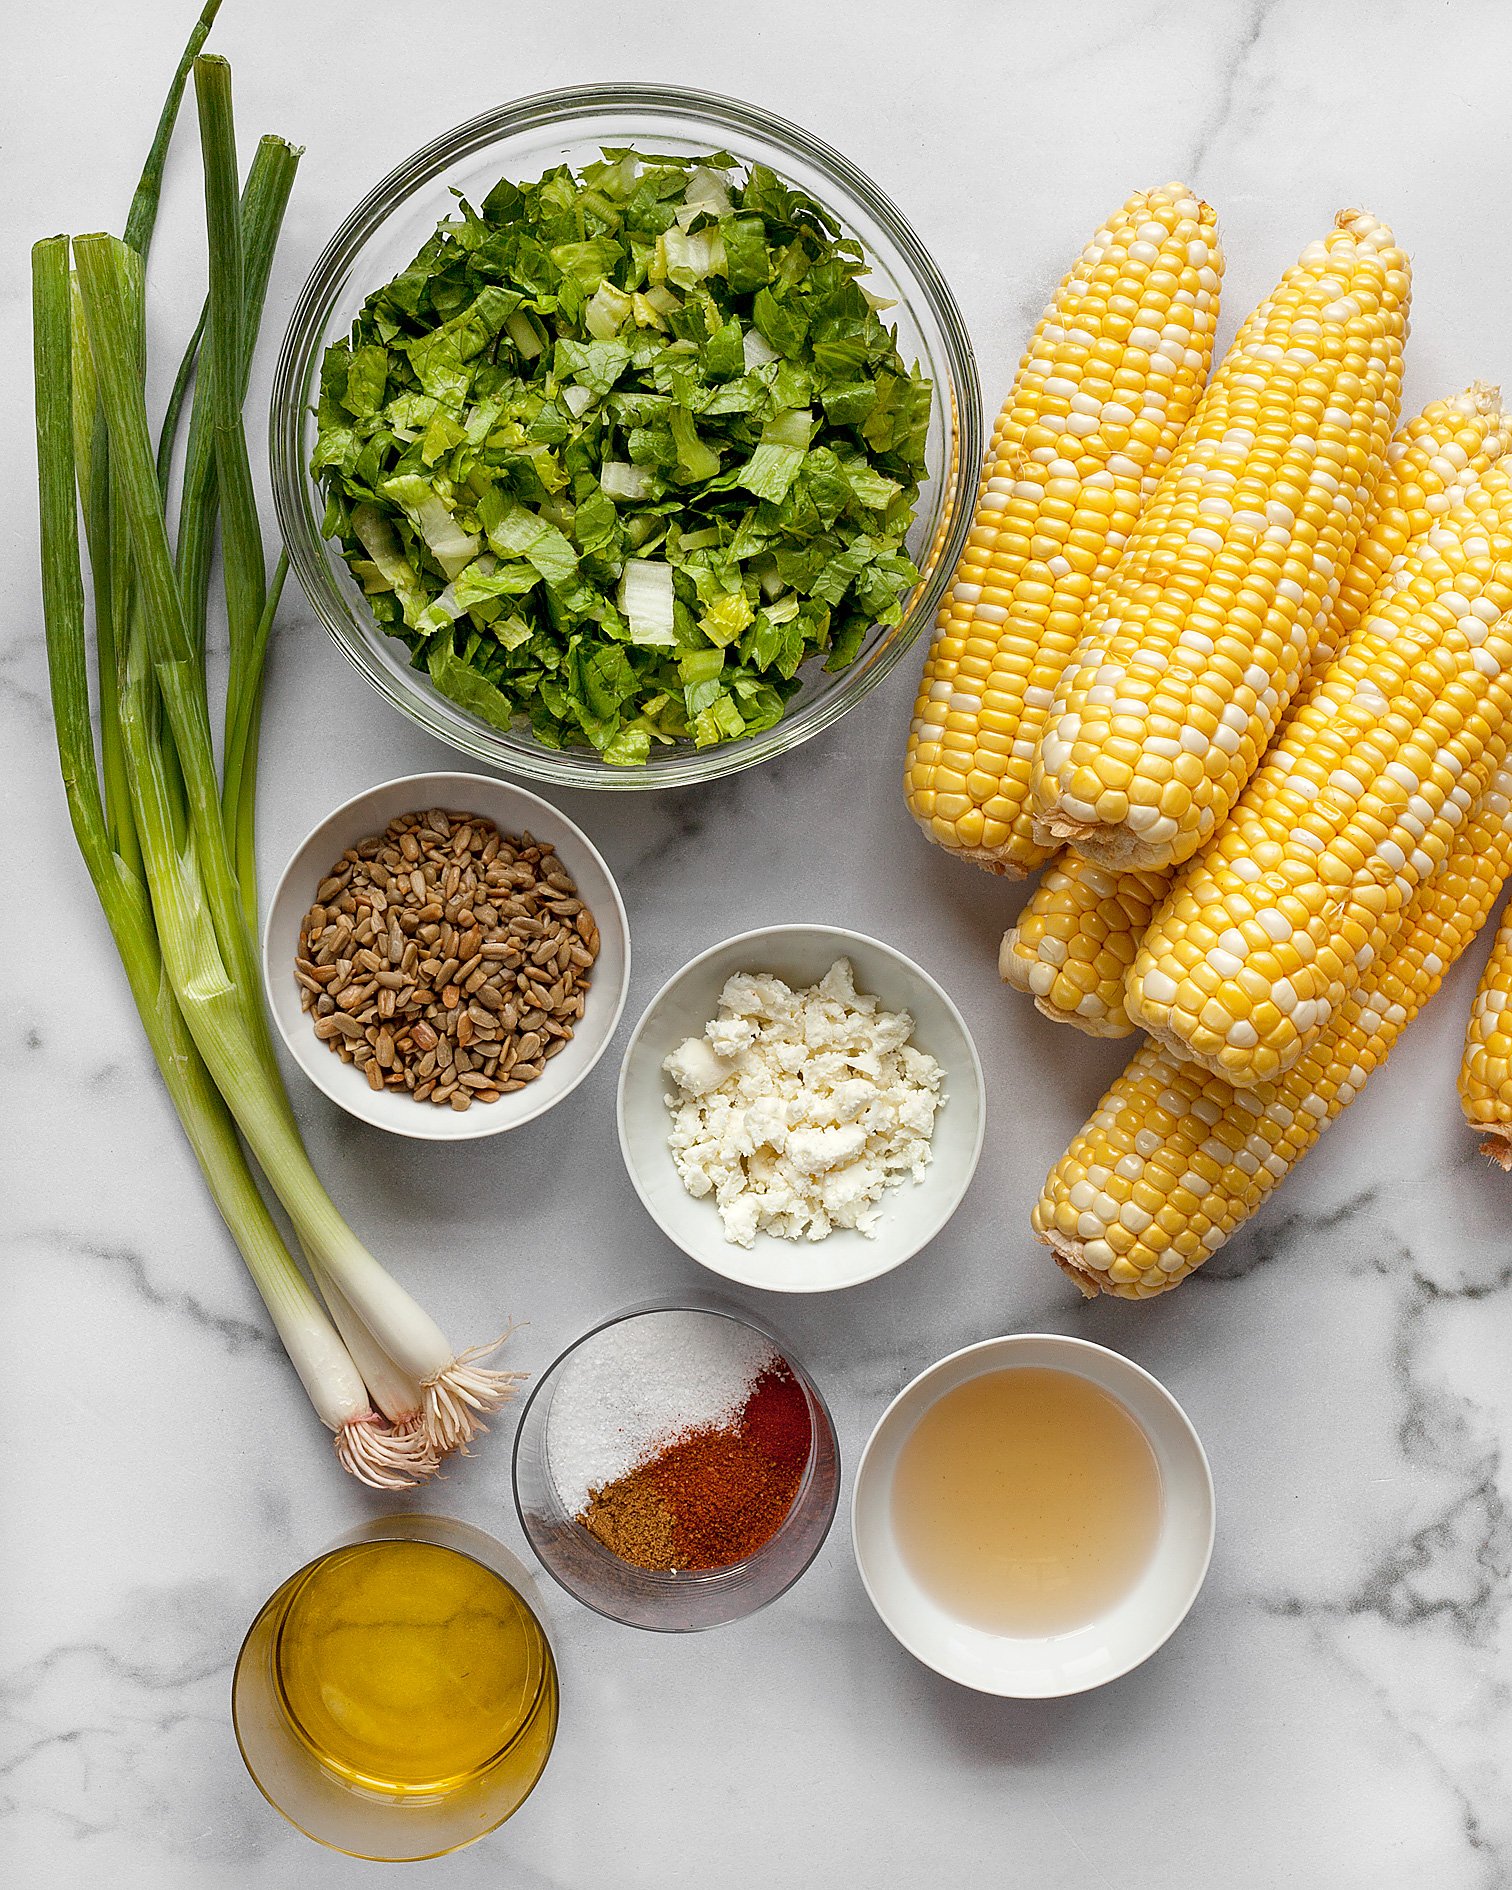 Ingredients including corn, romaine, scallions, feta and spices and oil.